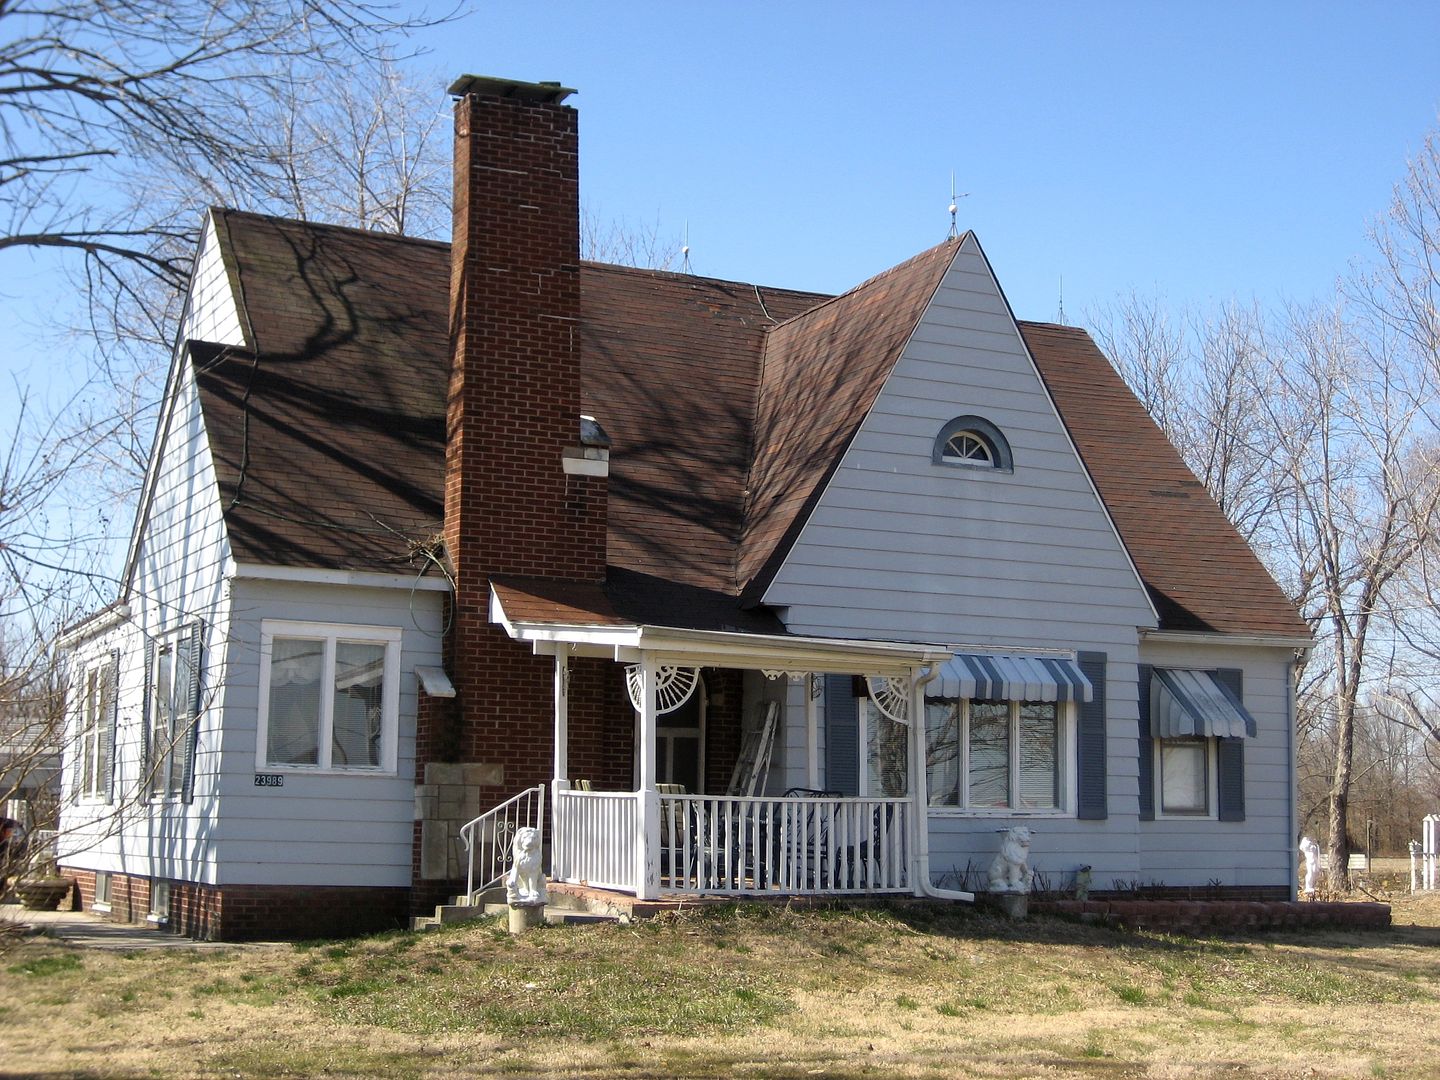 This Lewiston in Dowell, Illinois is in beautiful condition.